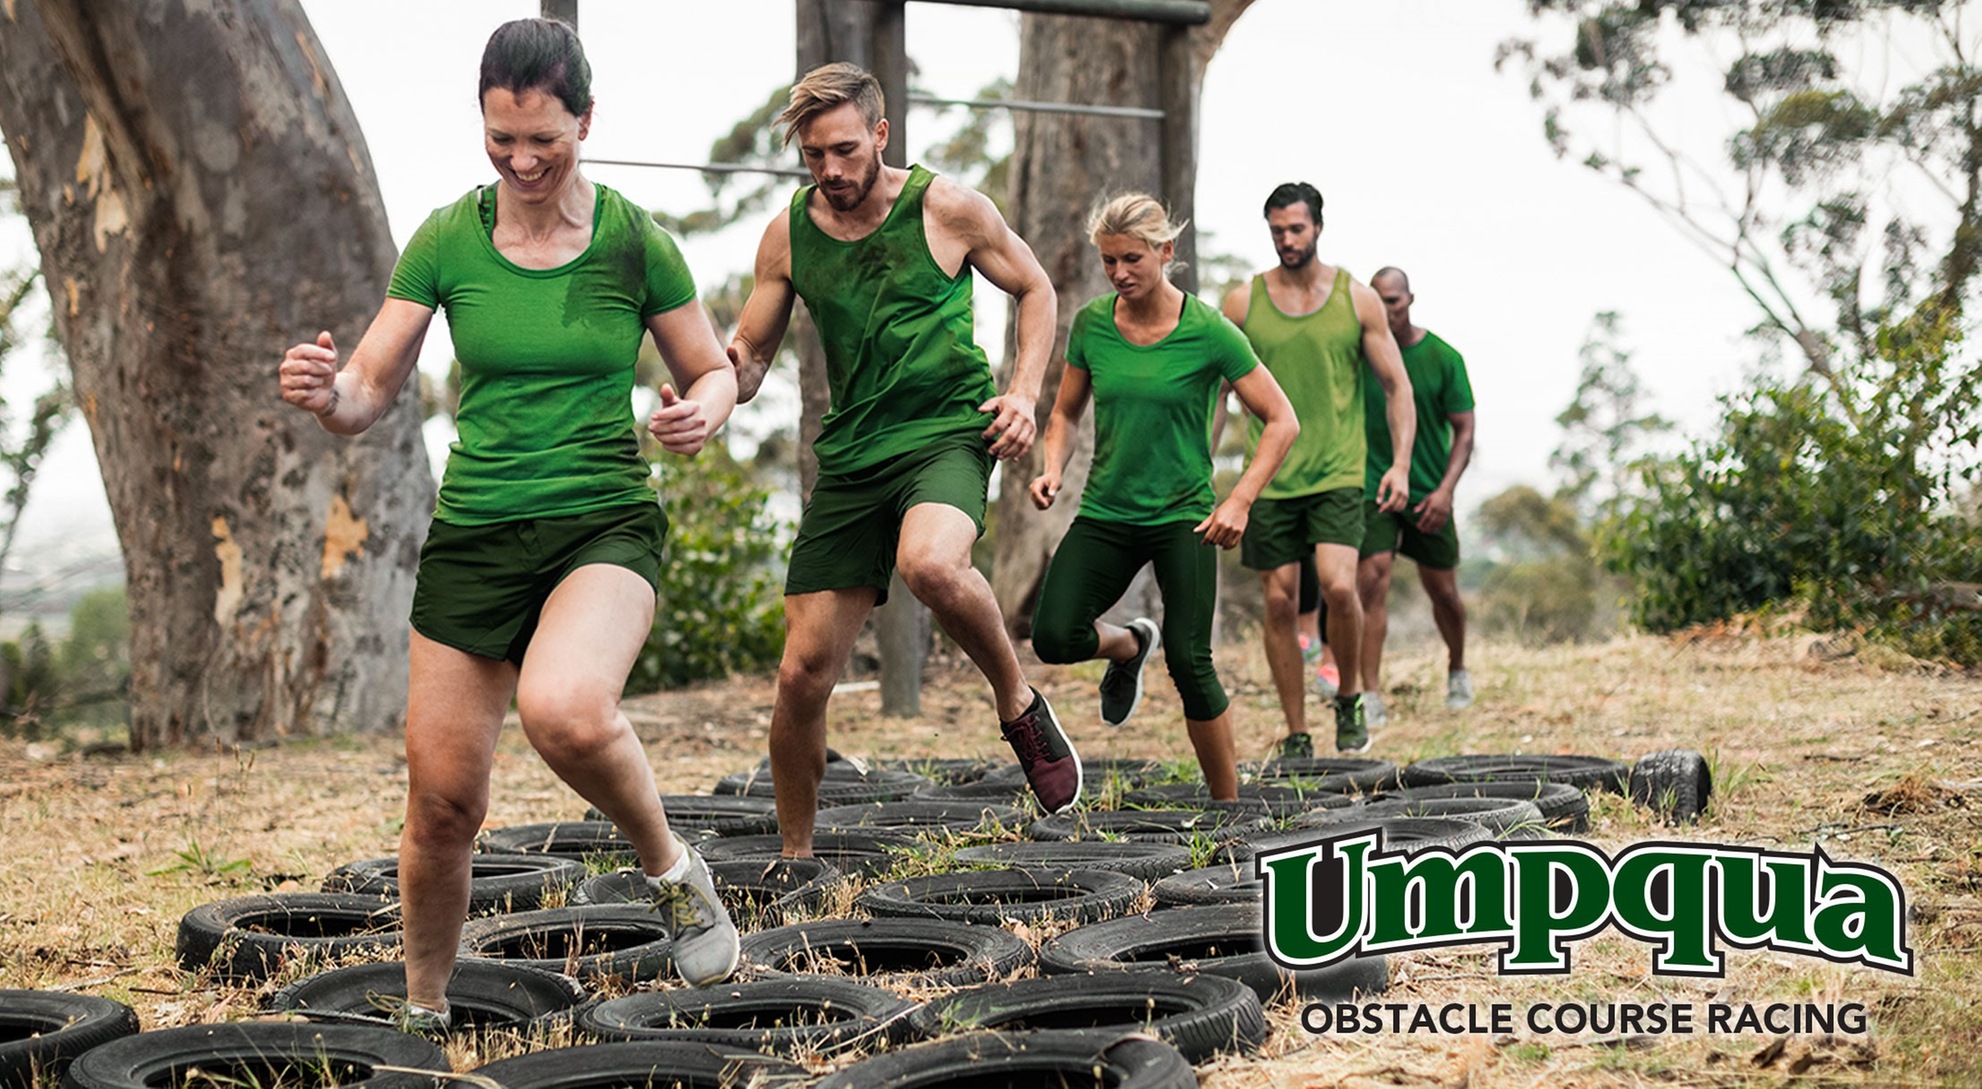 Do you Love Obstacle Course Racing?